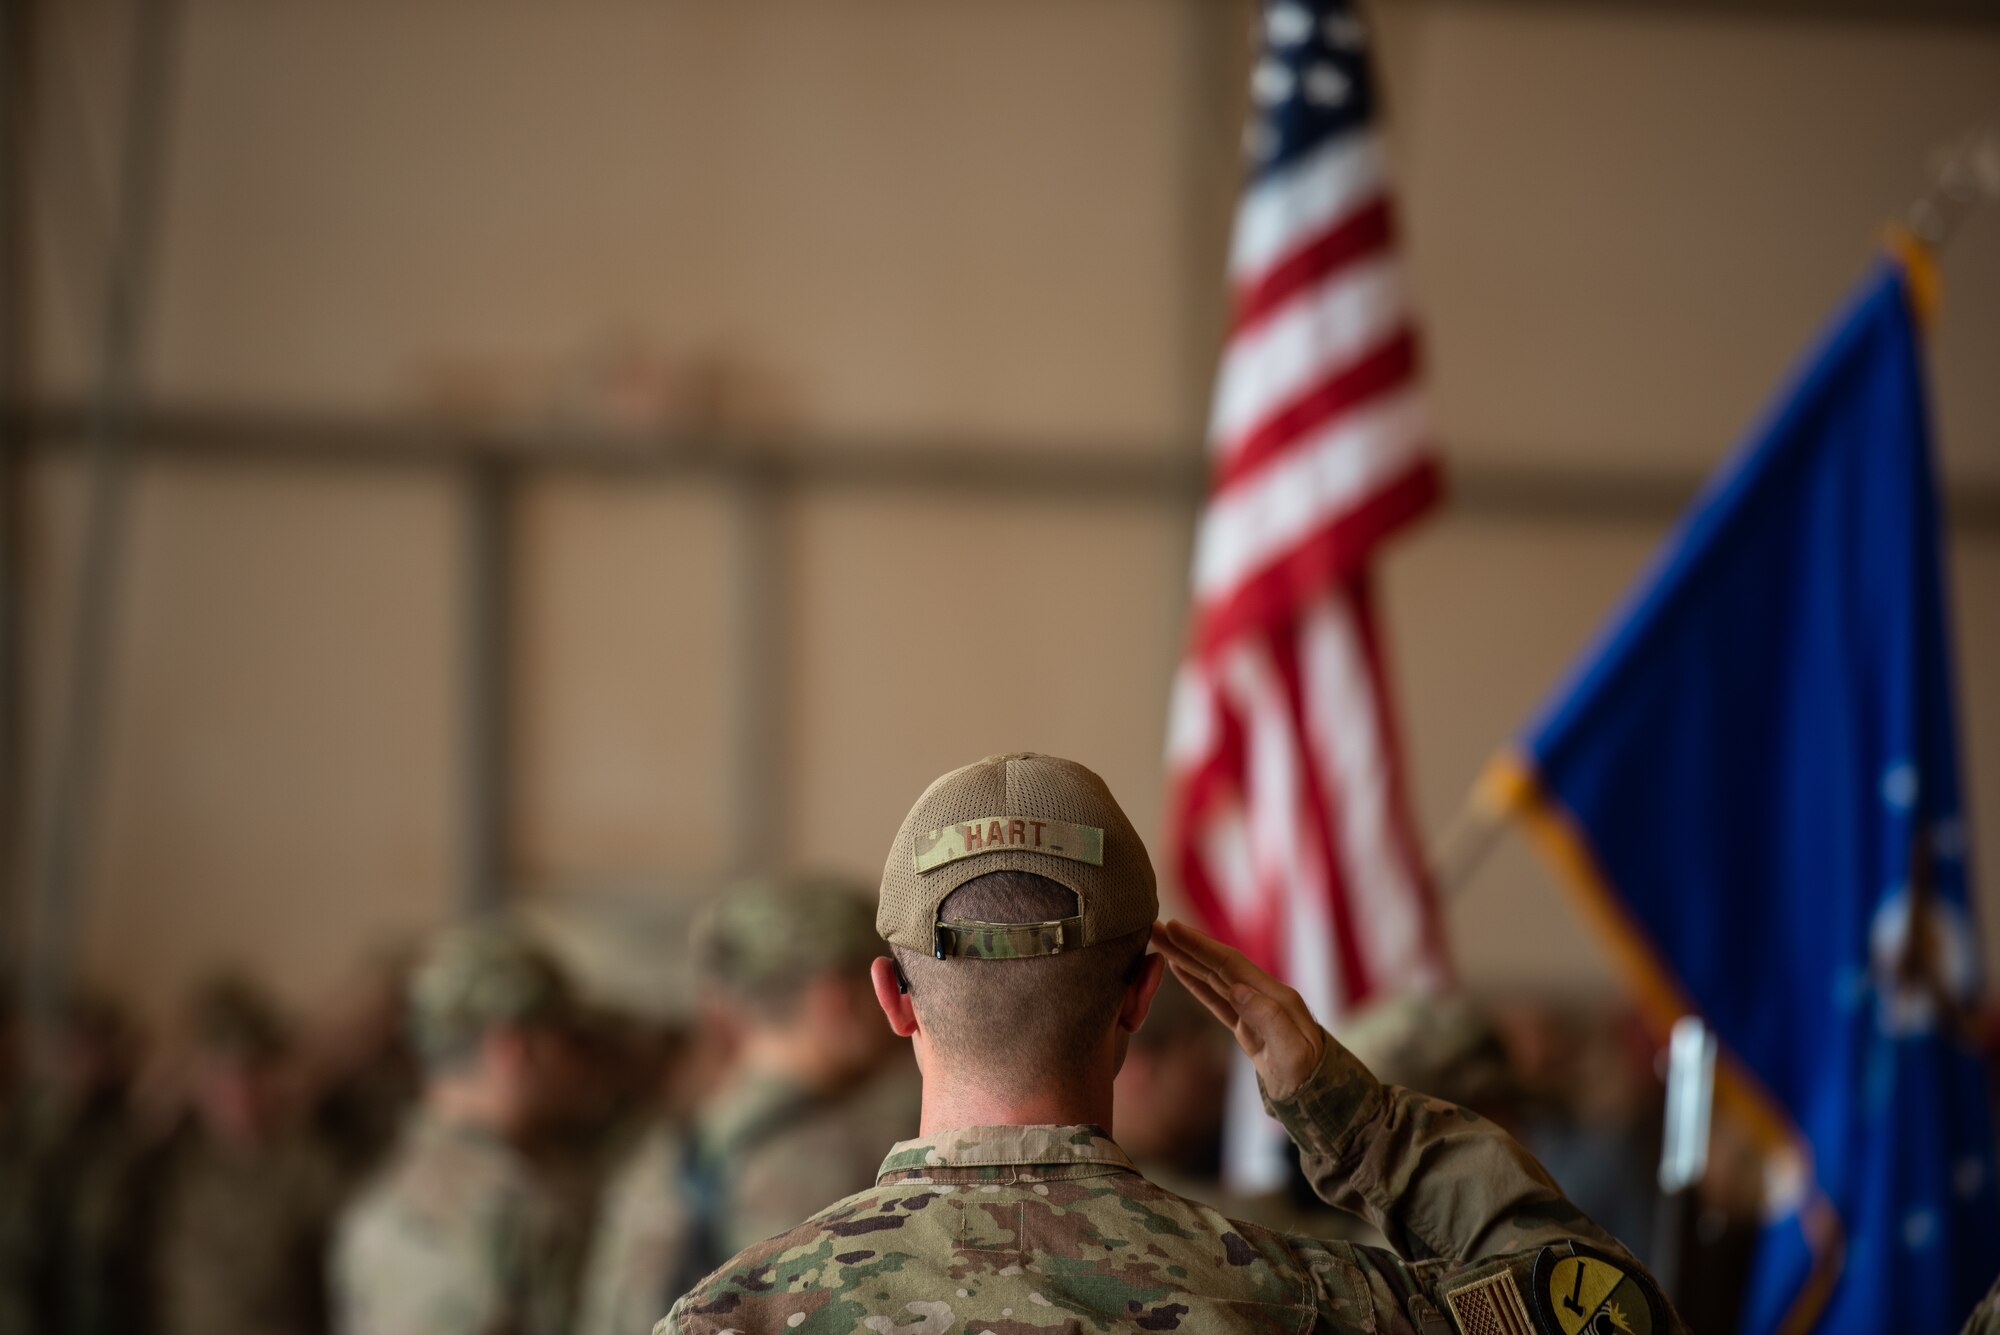 U.S. Air Force 1st Lt. Michael Hart, 724th Expeditionary Air Base Squadron logistics readiness flight commander, salutes the American flag during the 409th Air Expeditionary Group change of command ceremony at Air Base 201, Niger, June 28, 2019. The change of command recognized Col. Steven P. Bording for his leadership, and welcomed the new commander, Col. Jonathan M. Creer. (U.S. Air Force photo by Staff Sgt. Devin Boyer)